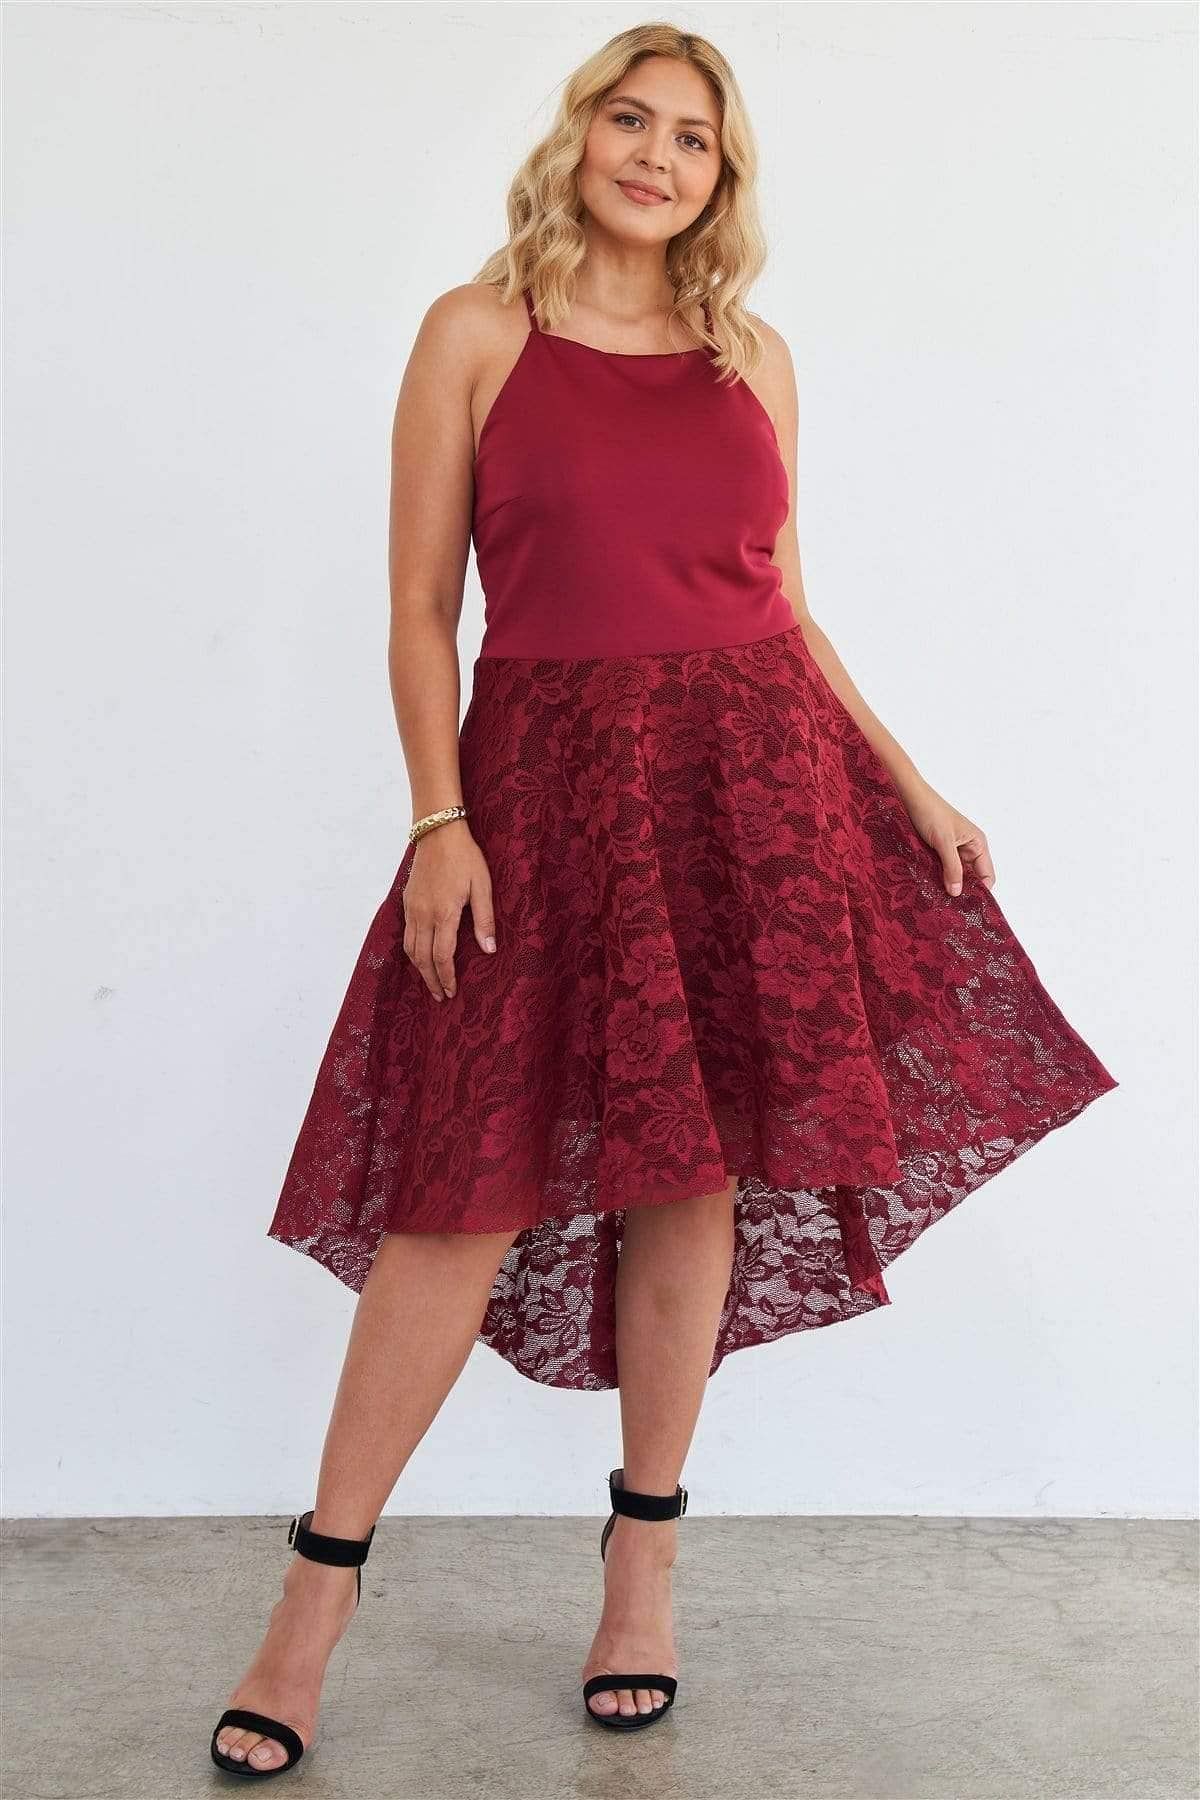 Red Plus Size Lace Floral Dress - Shopping Therapy, LLC dress